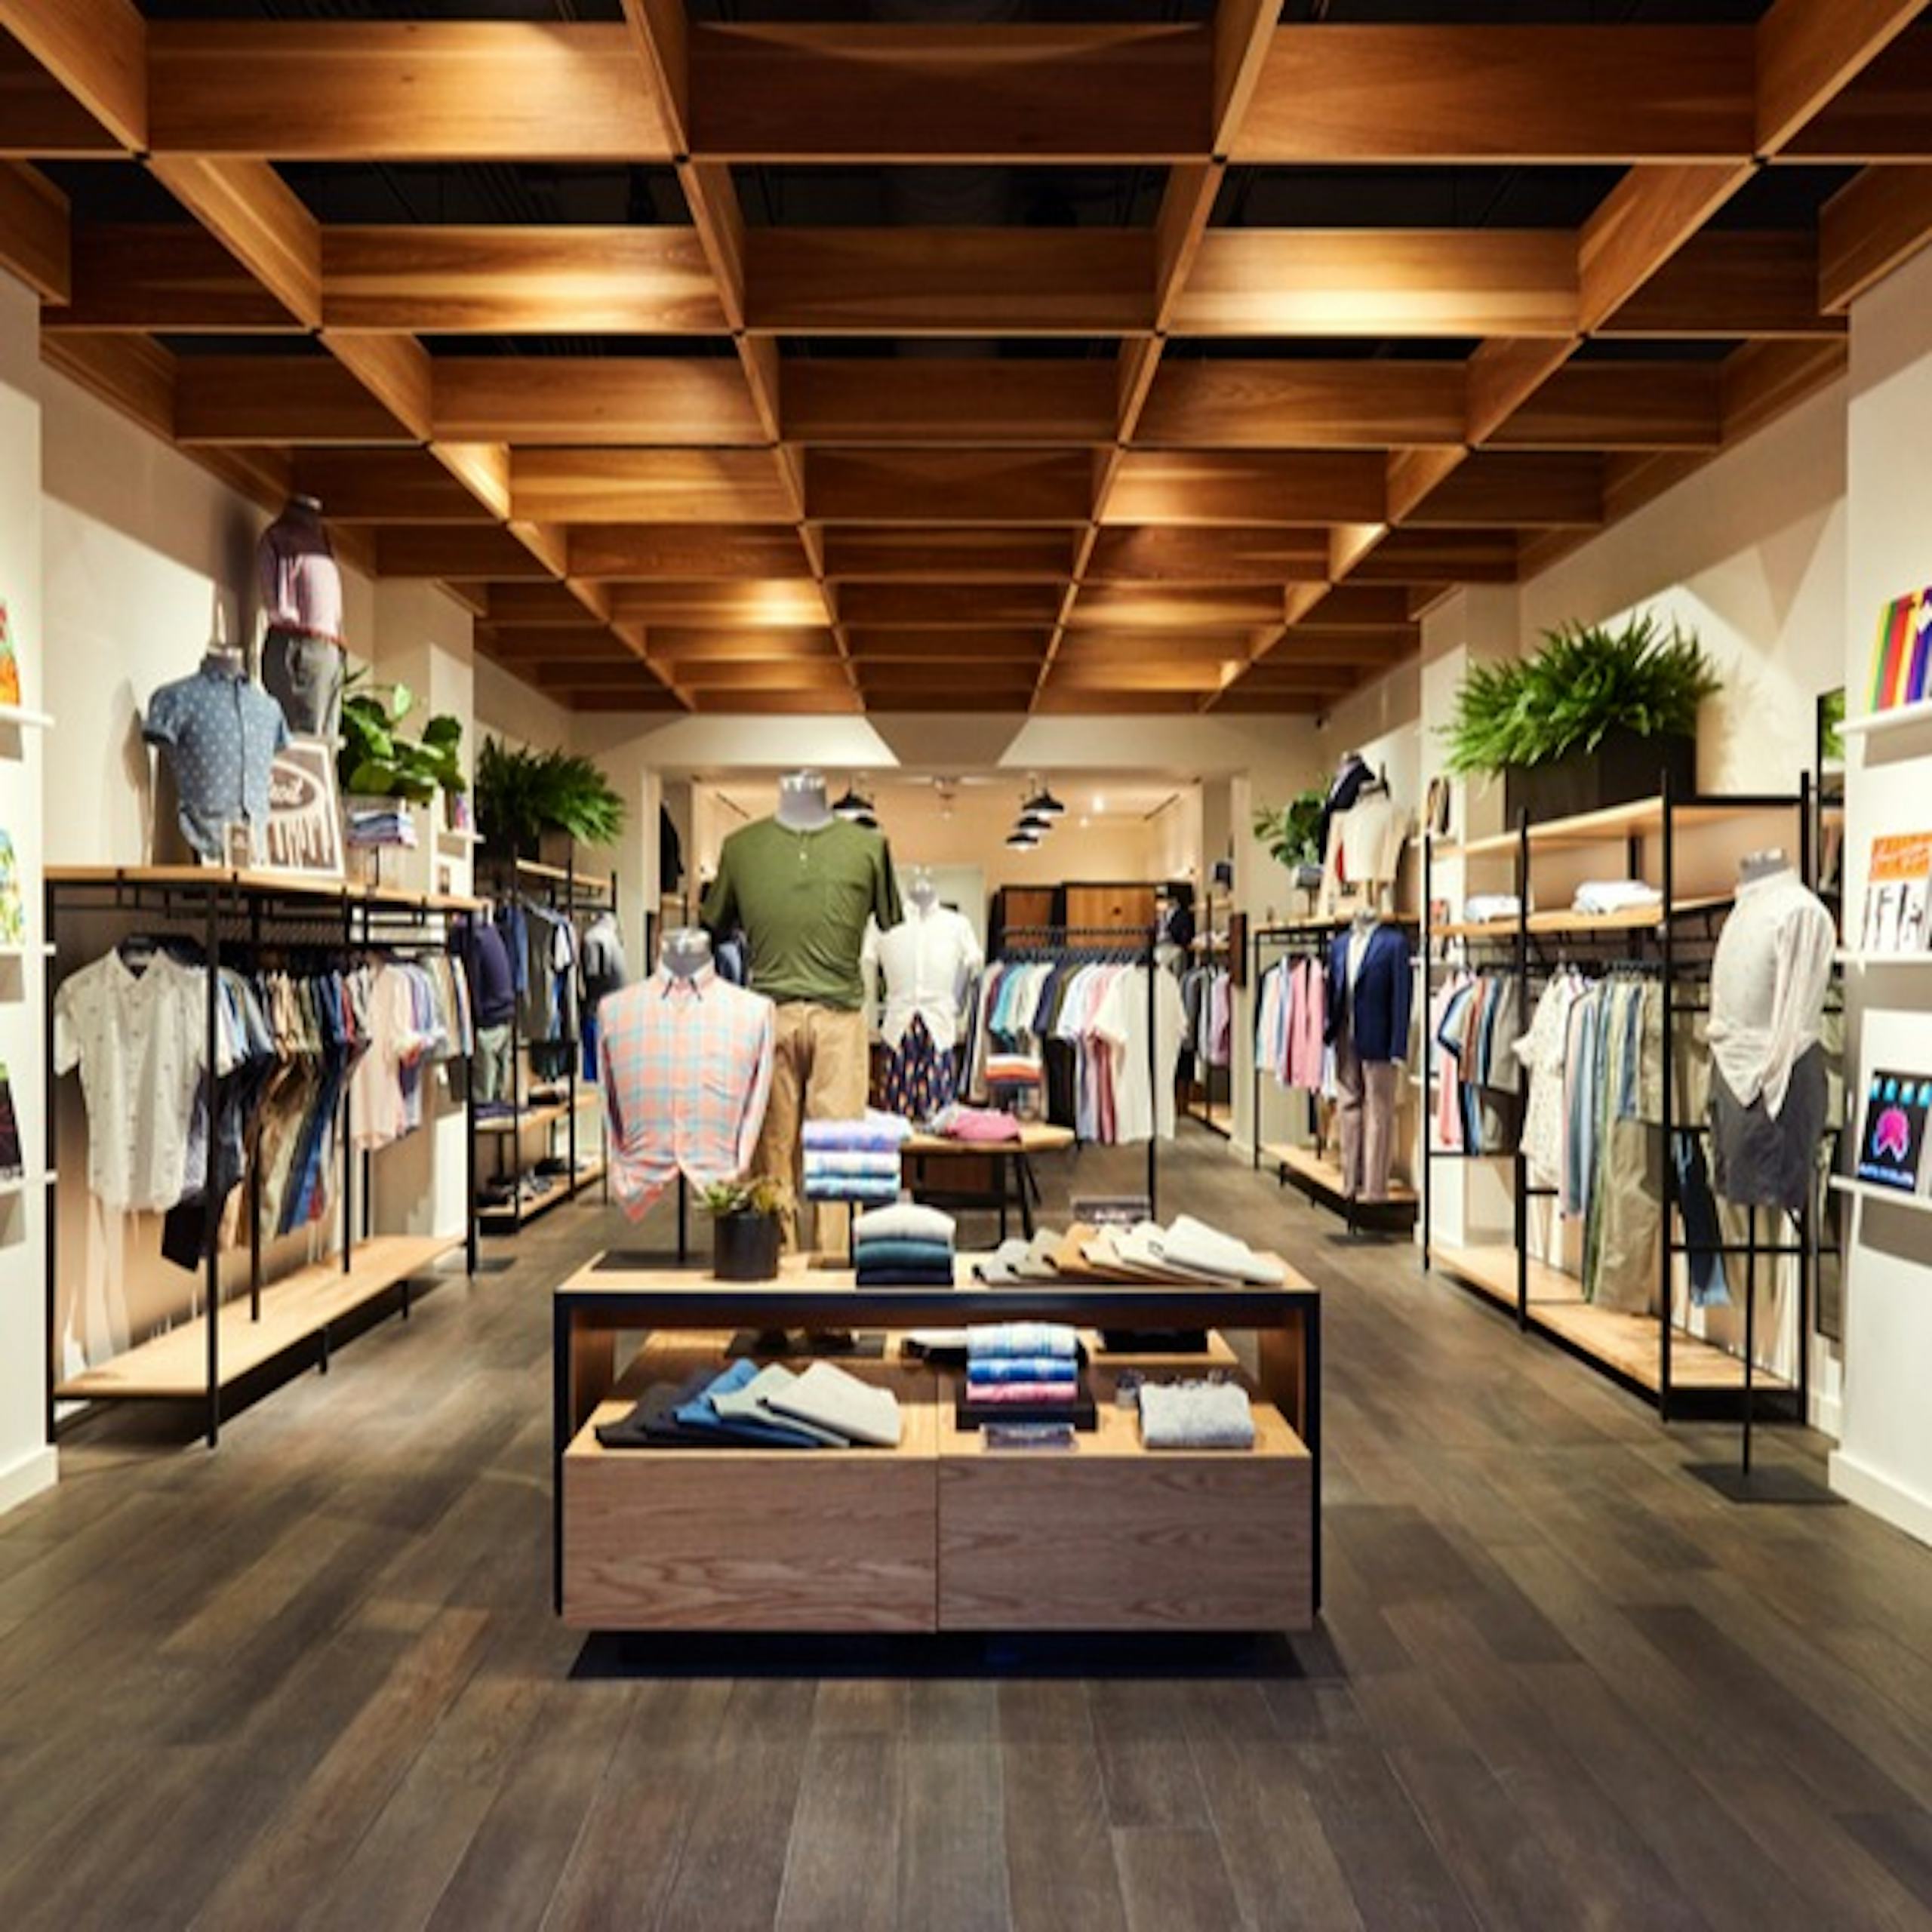 Image of Bonobos store display in Woodward Ave, Detroit.